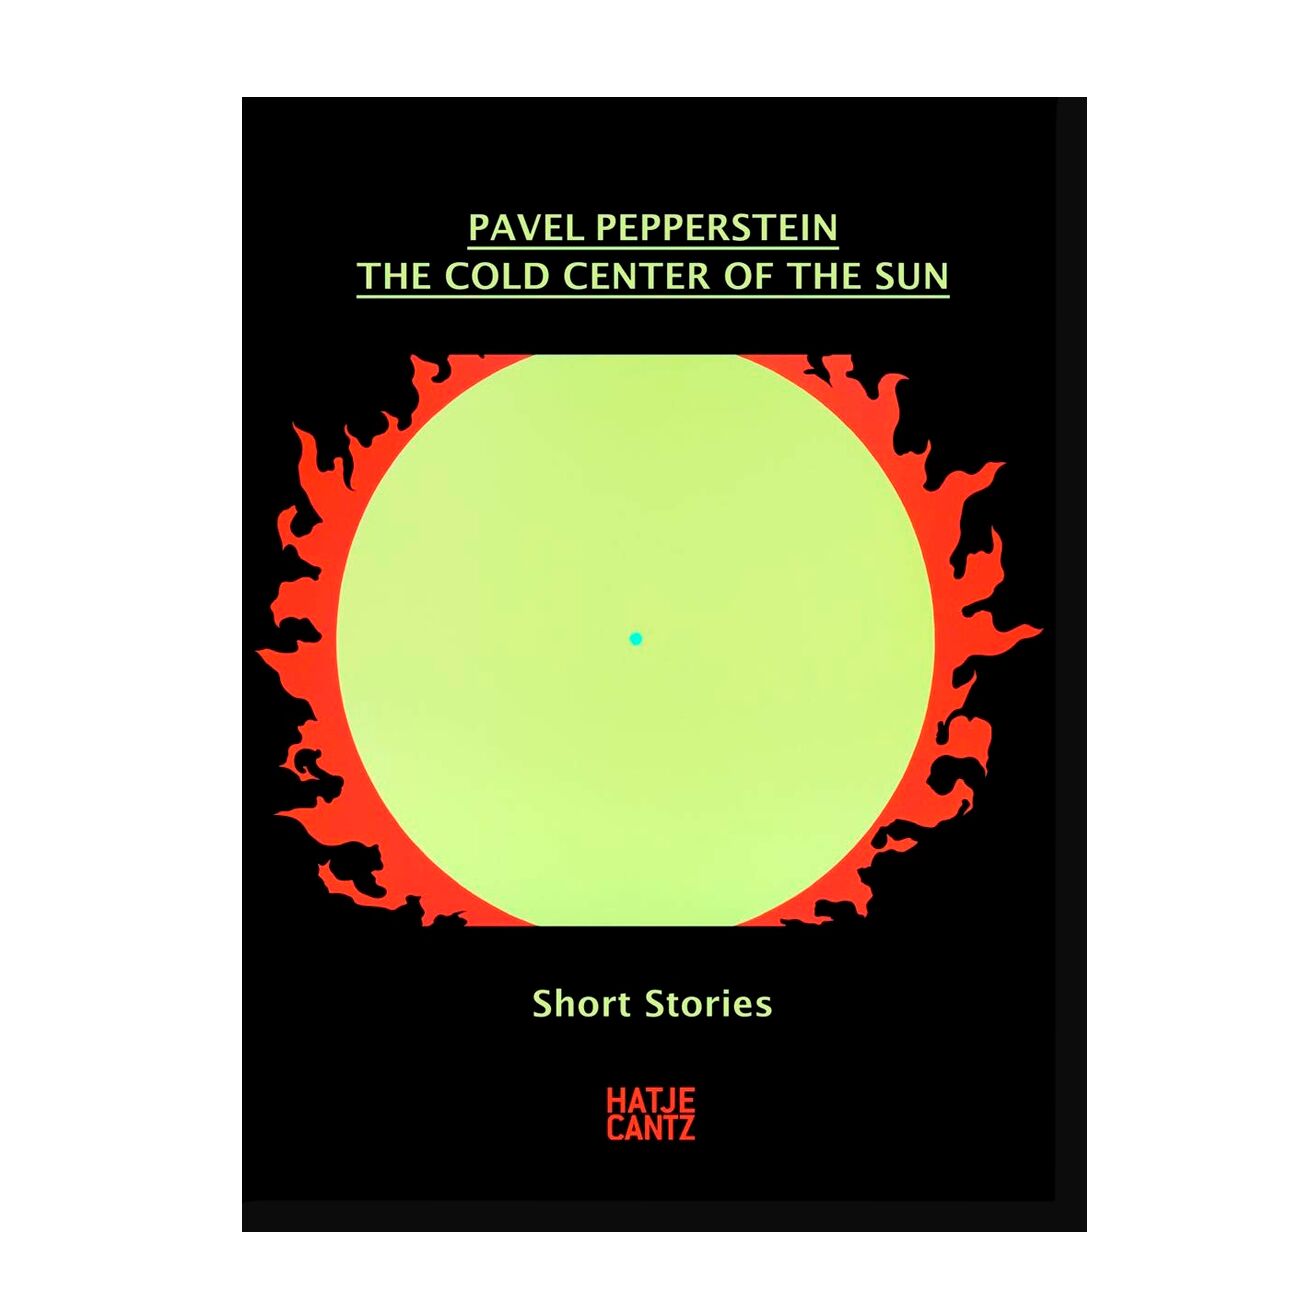 Pavel Pepperstein: The Cold Center of the Sun